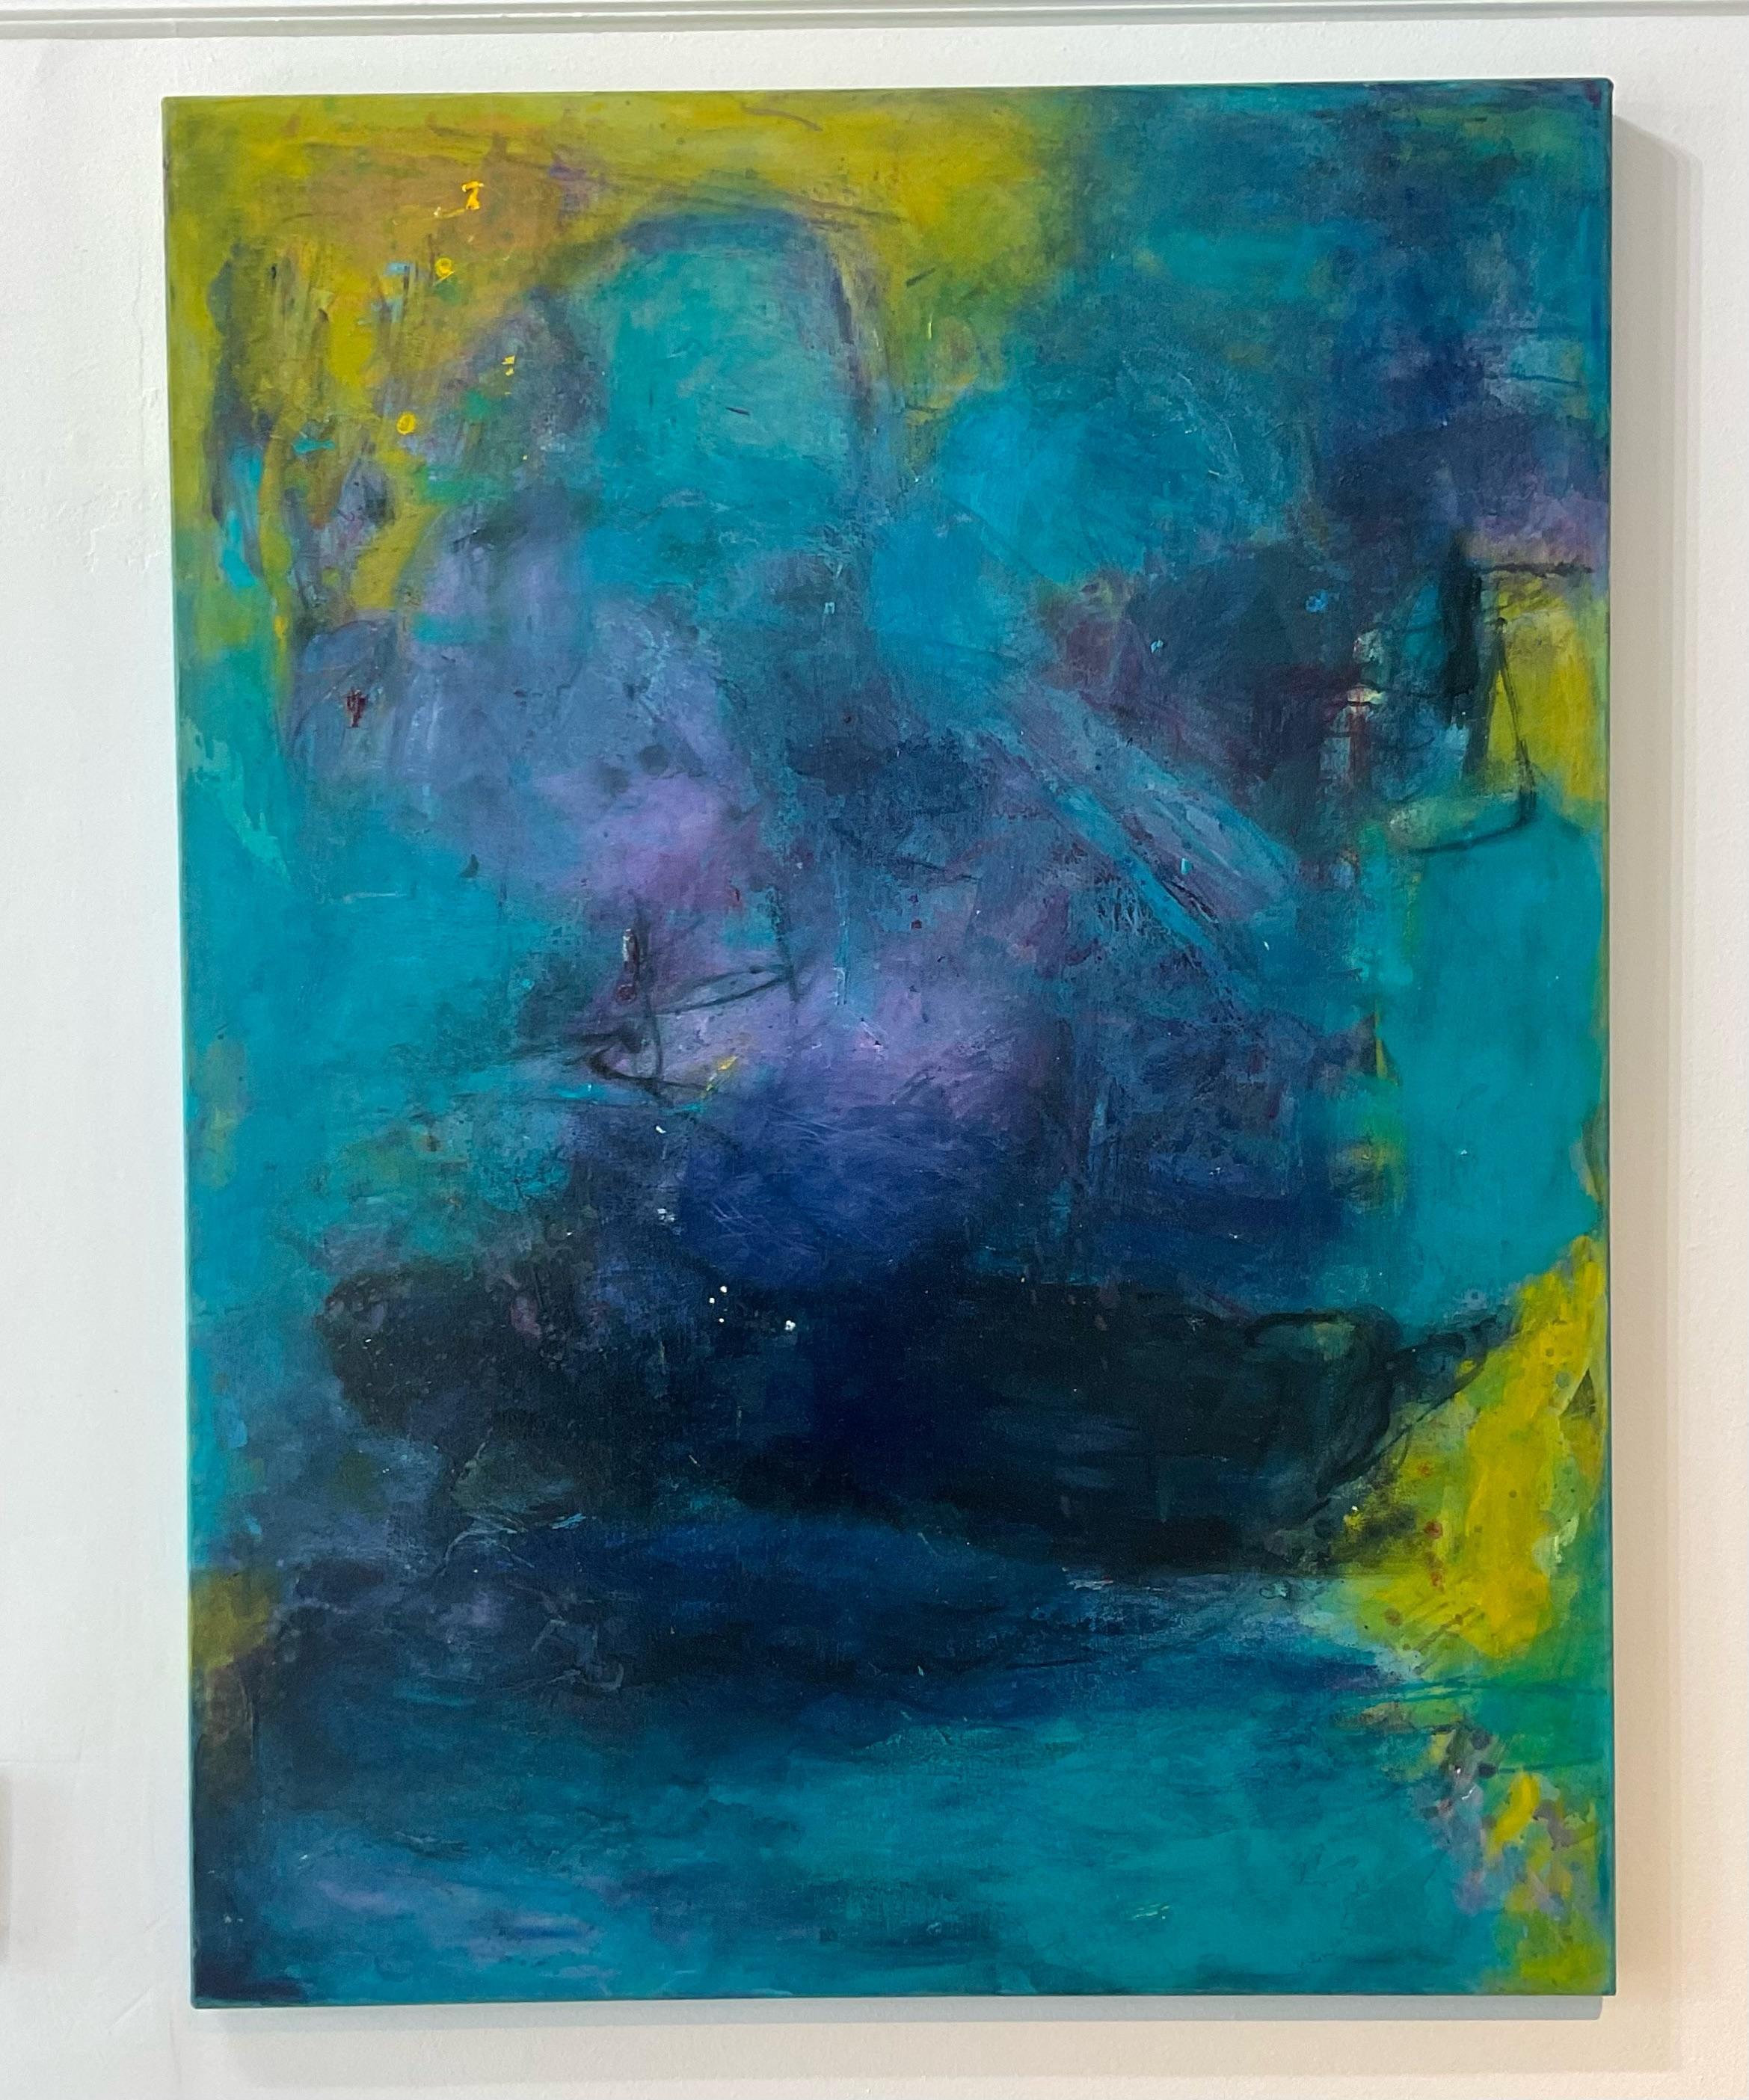 An exhilarating vintage boho oil painting. The image is completely captivating with deep blues and a splash of vibrant yellow all swirled and placed in a way that makes you feel could be lost in thought for hours. Signed by the artist on the back.